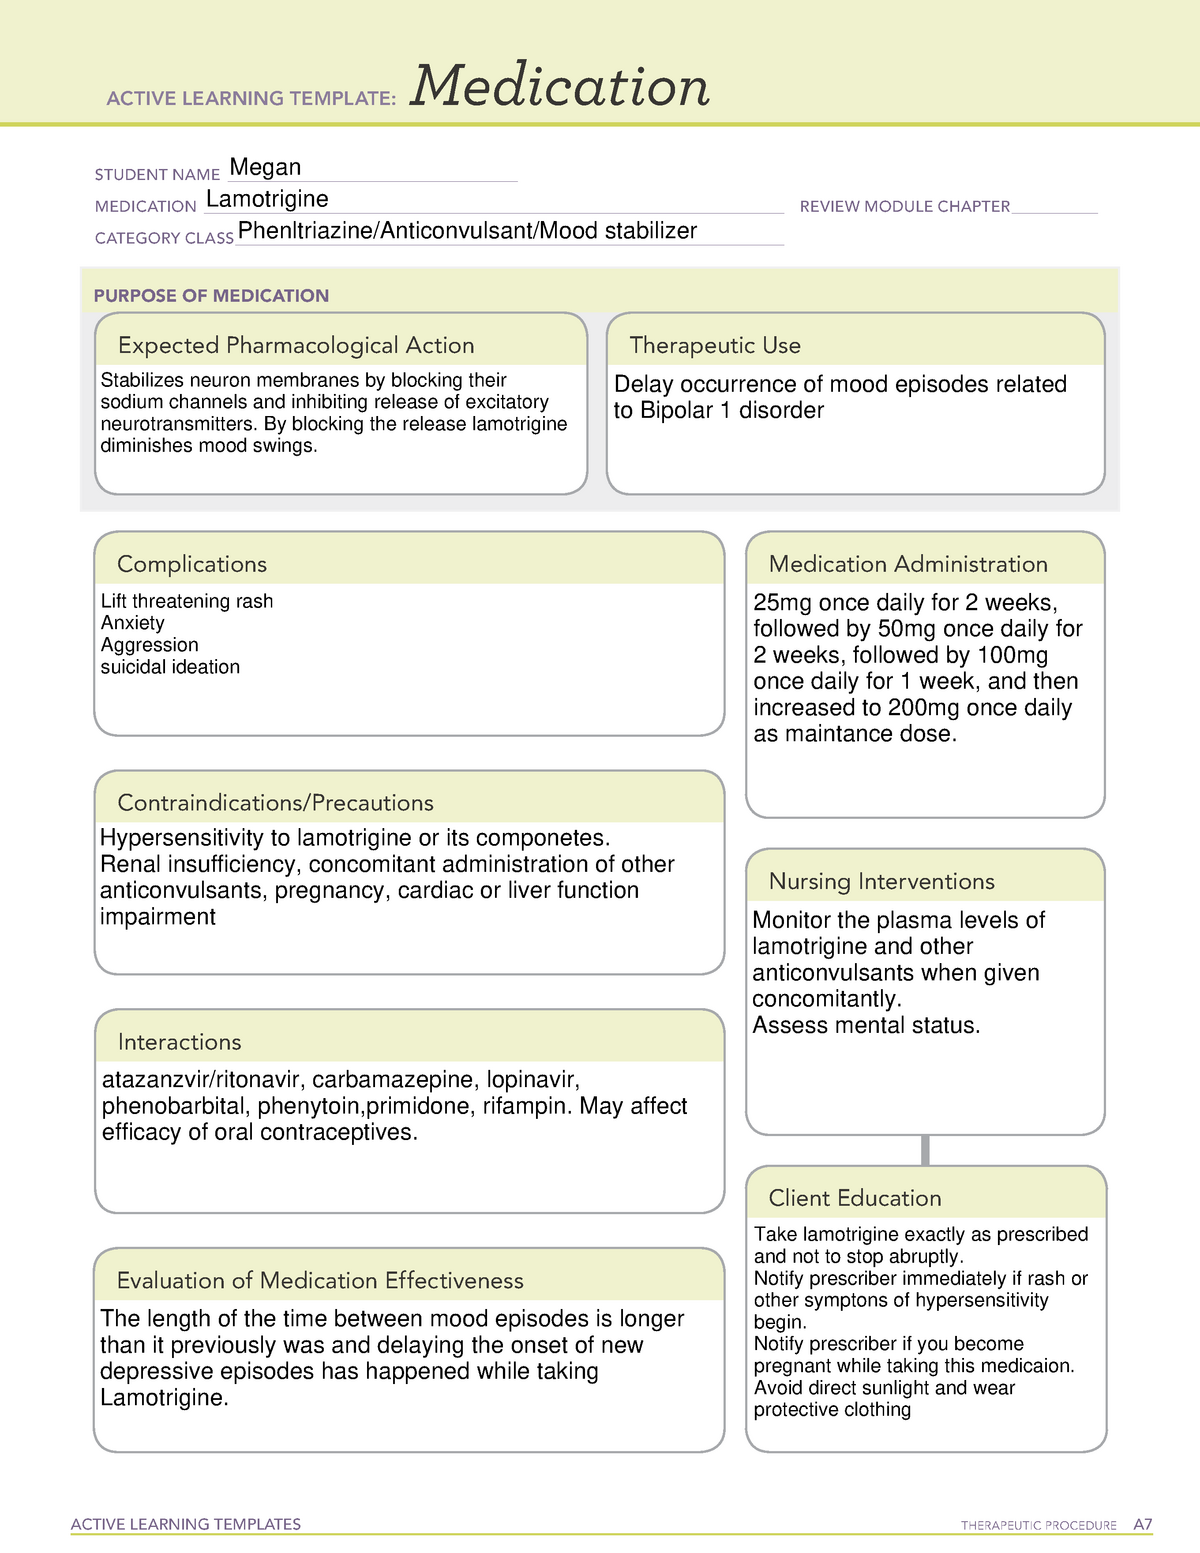 ati-medication-template-risperdal-active-learning-templates-therapeutic-procedure-a-medication